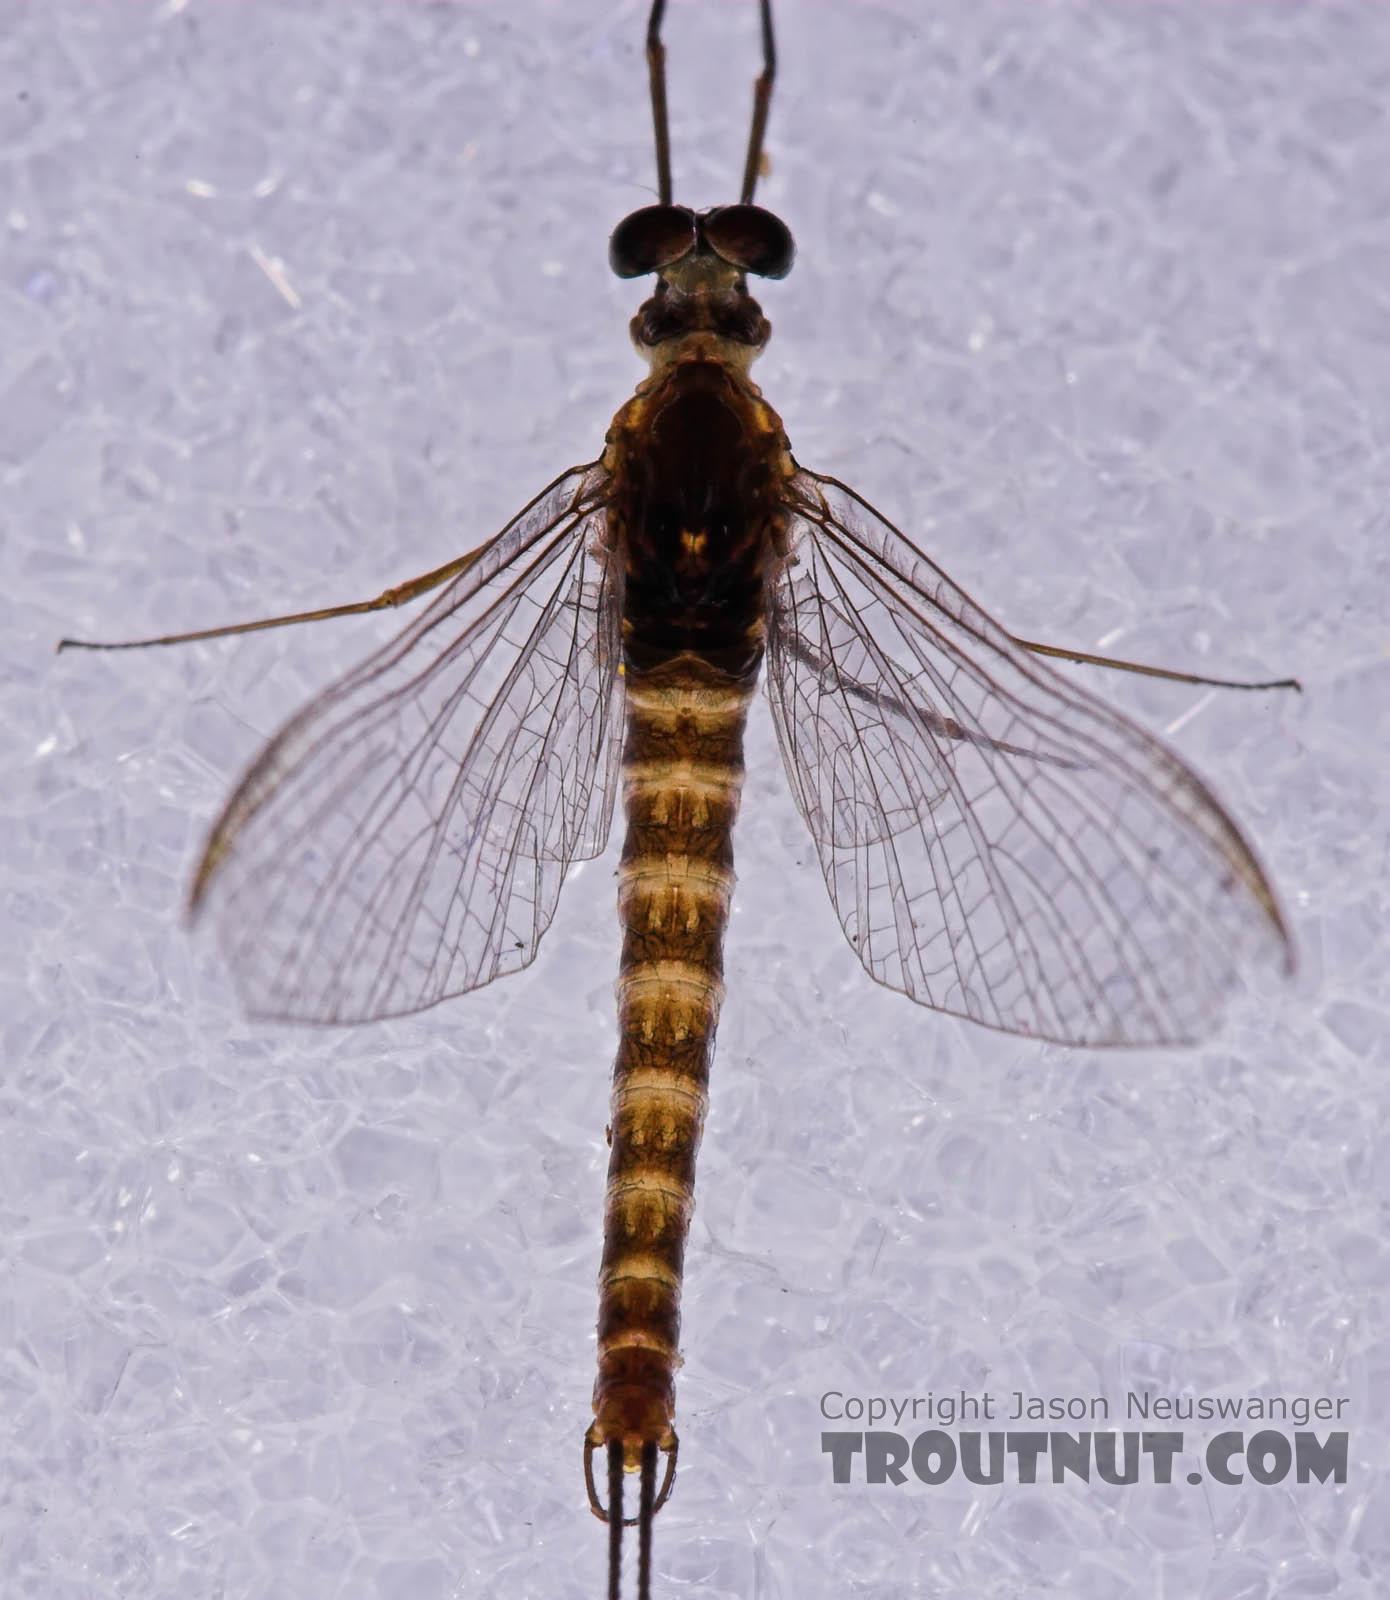 Male Epeorus pleuralis (Quill Gordon) Mayfly Spinner from Mongaup Creek in New York